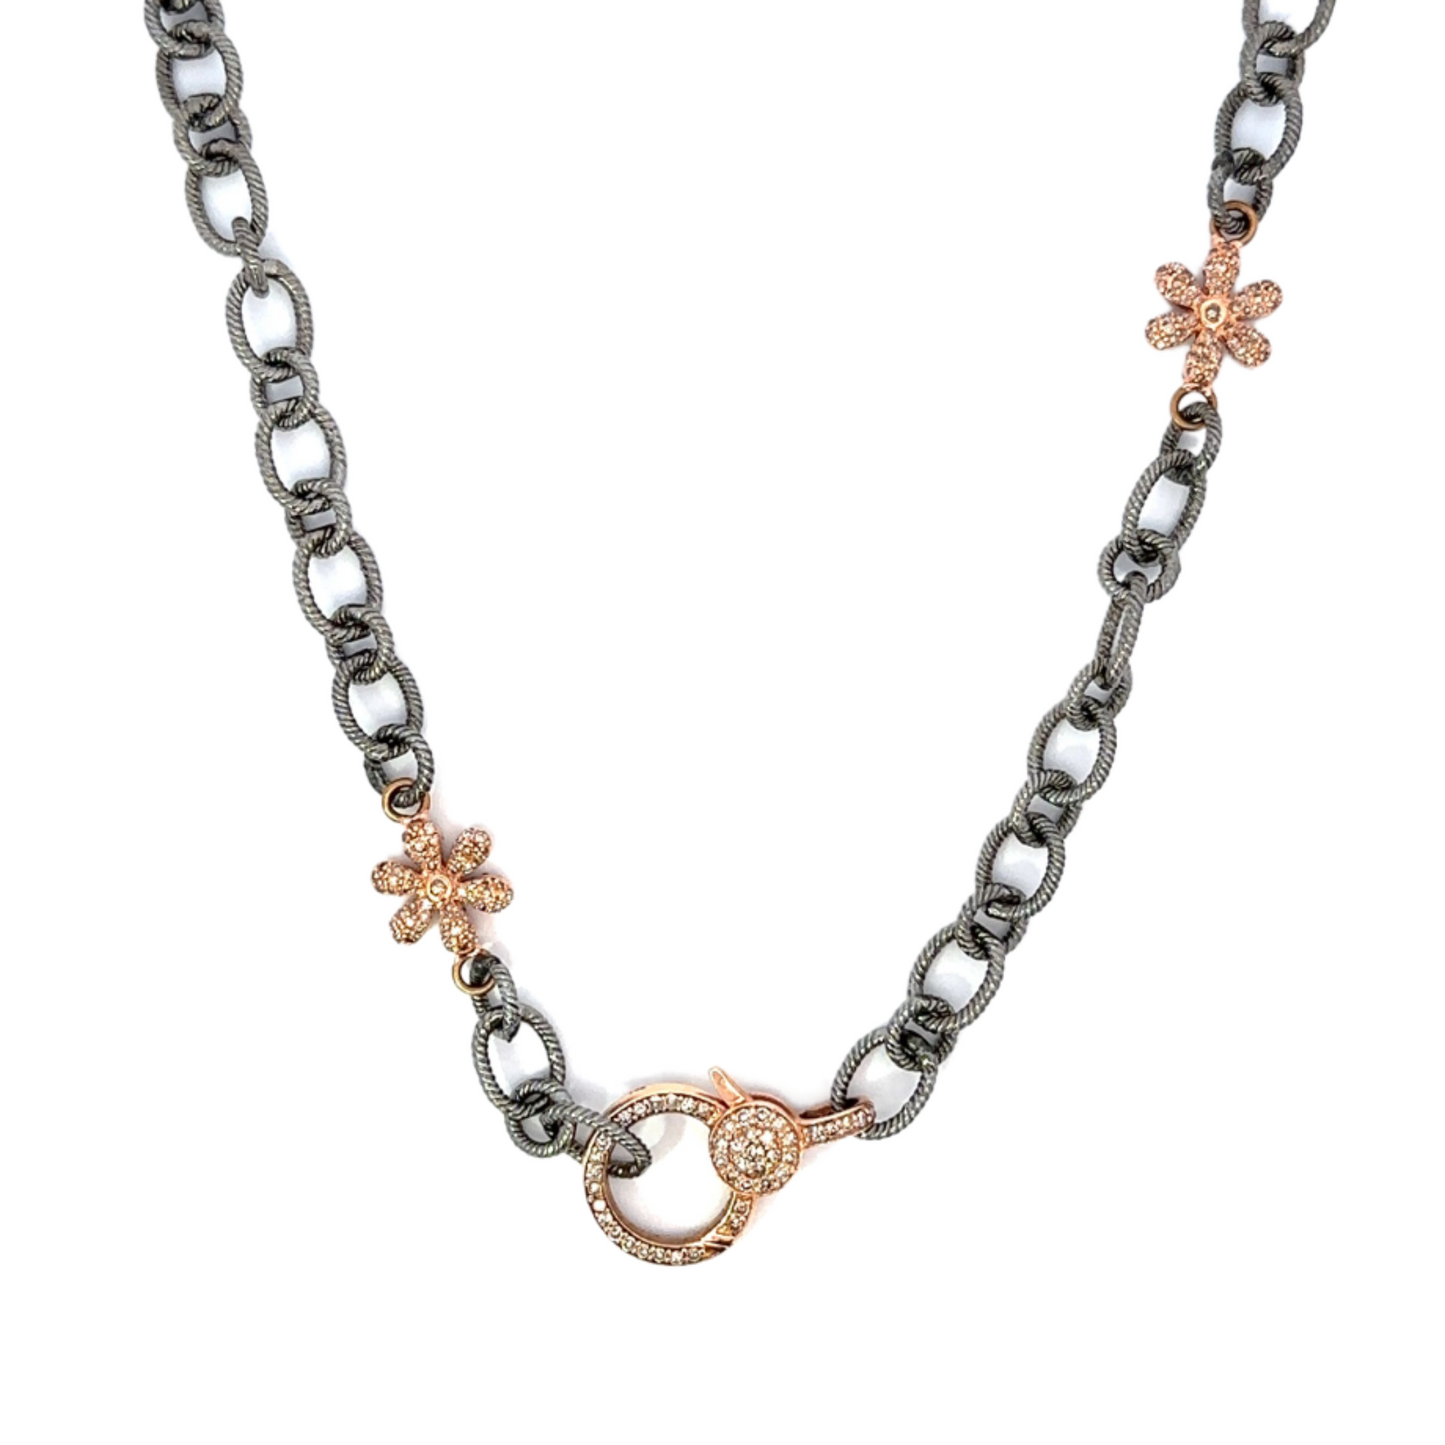 Oval Link Sterling Chain Accented By Two Rose Gold Pave Flowers and Two Tone Lobster